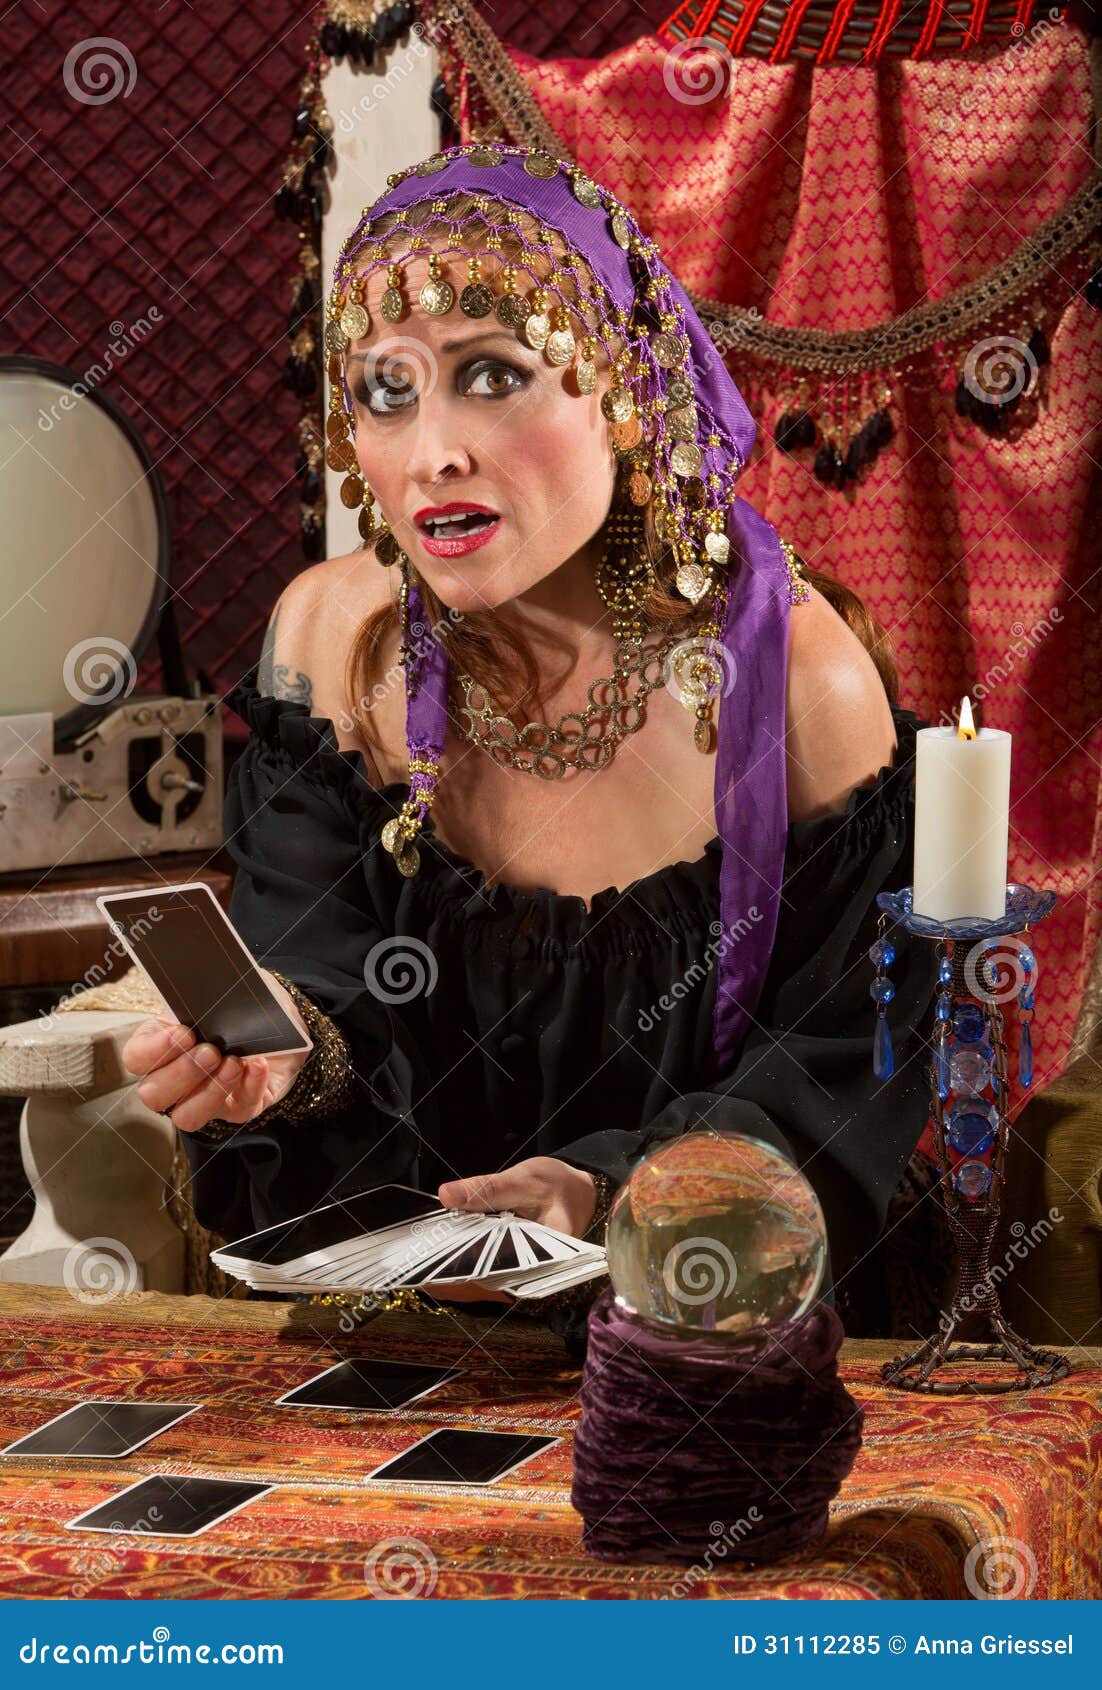 207 Lady Reading Tarot Cards Stock Photos Free Photos from Dreamstime